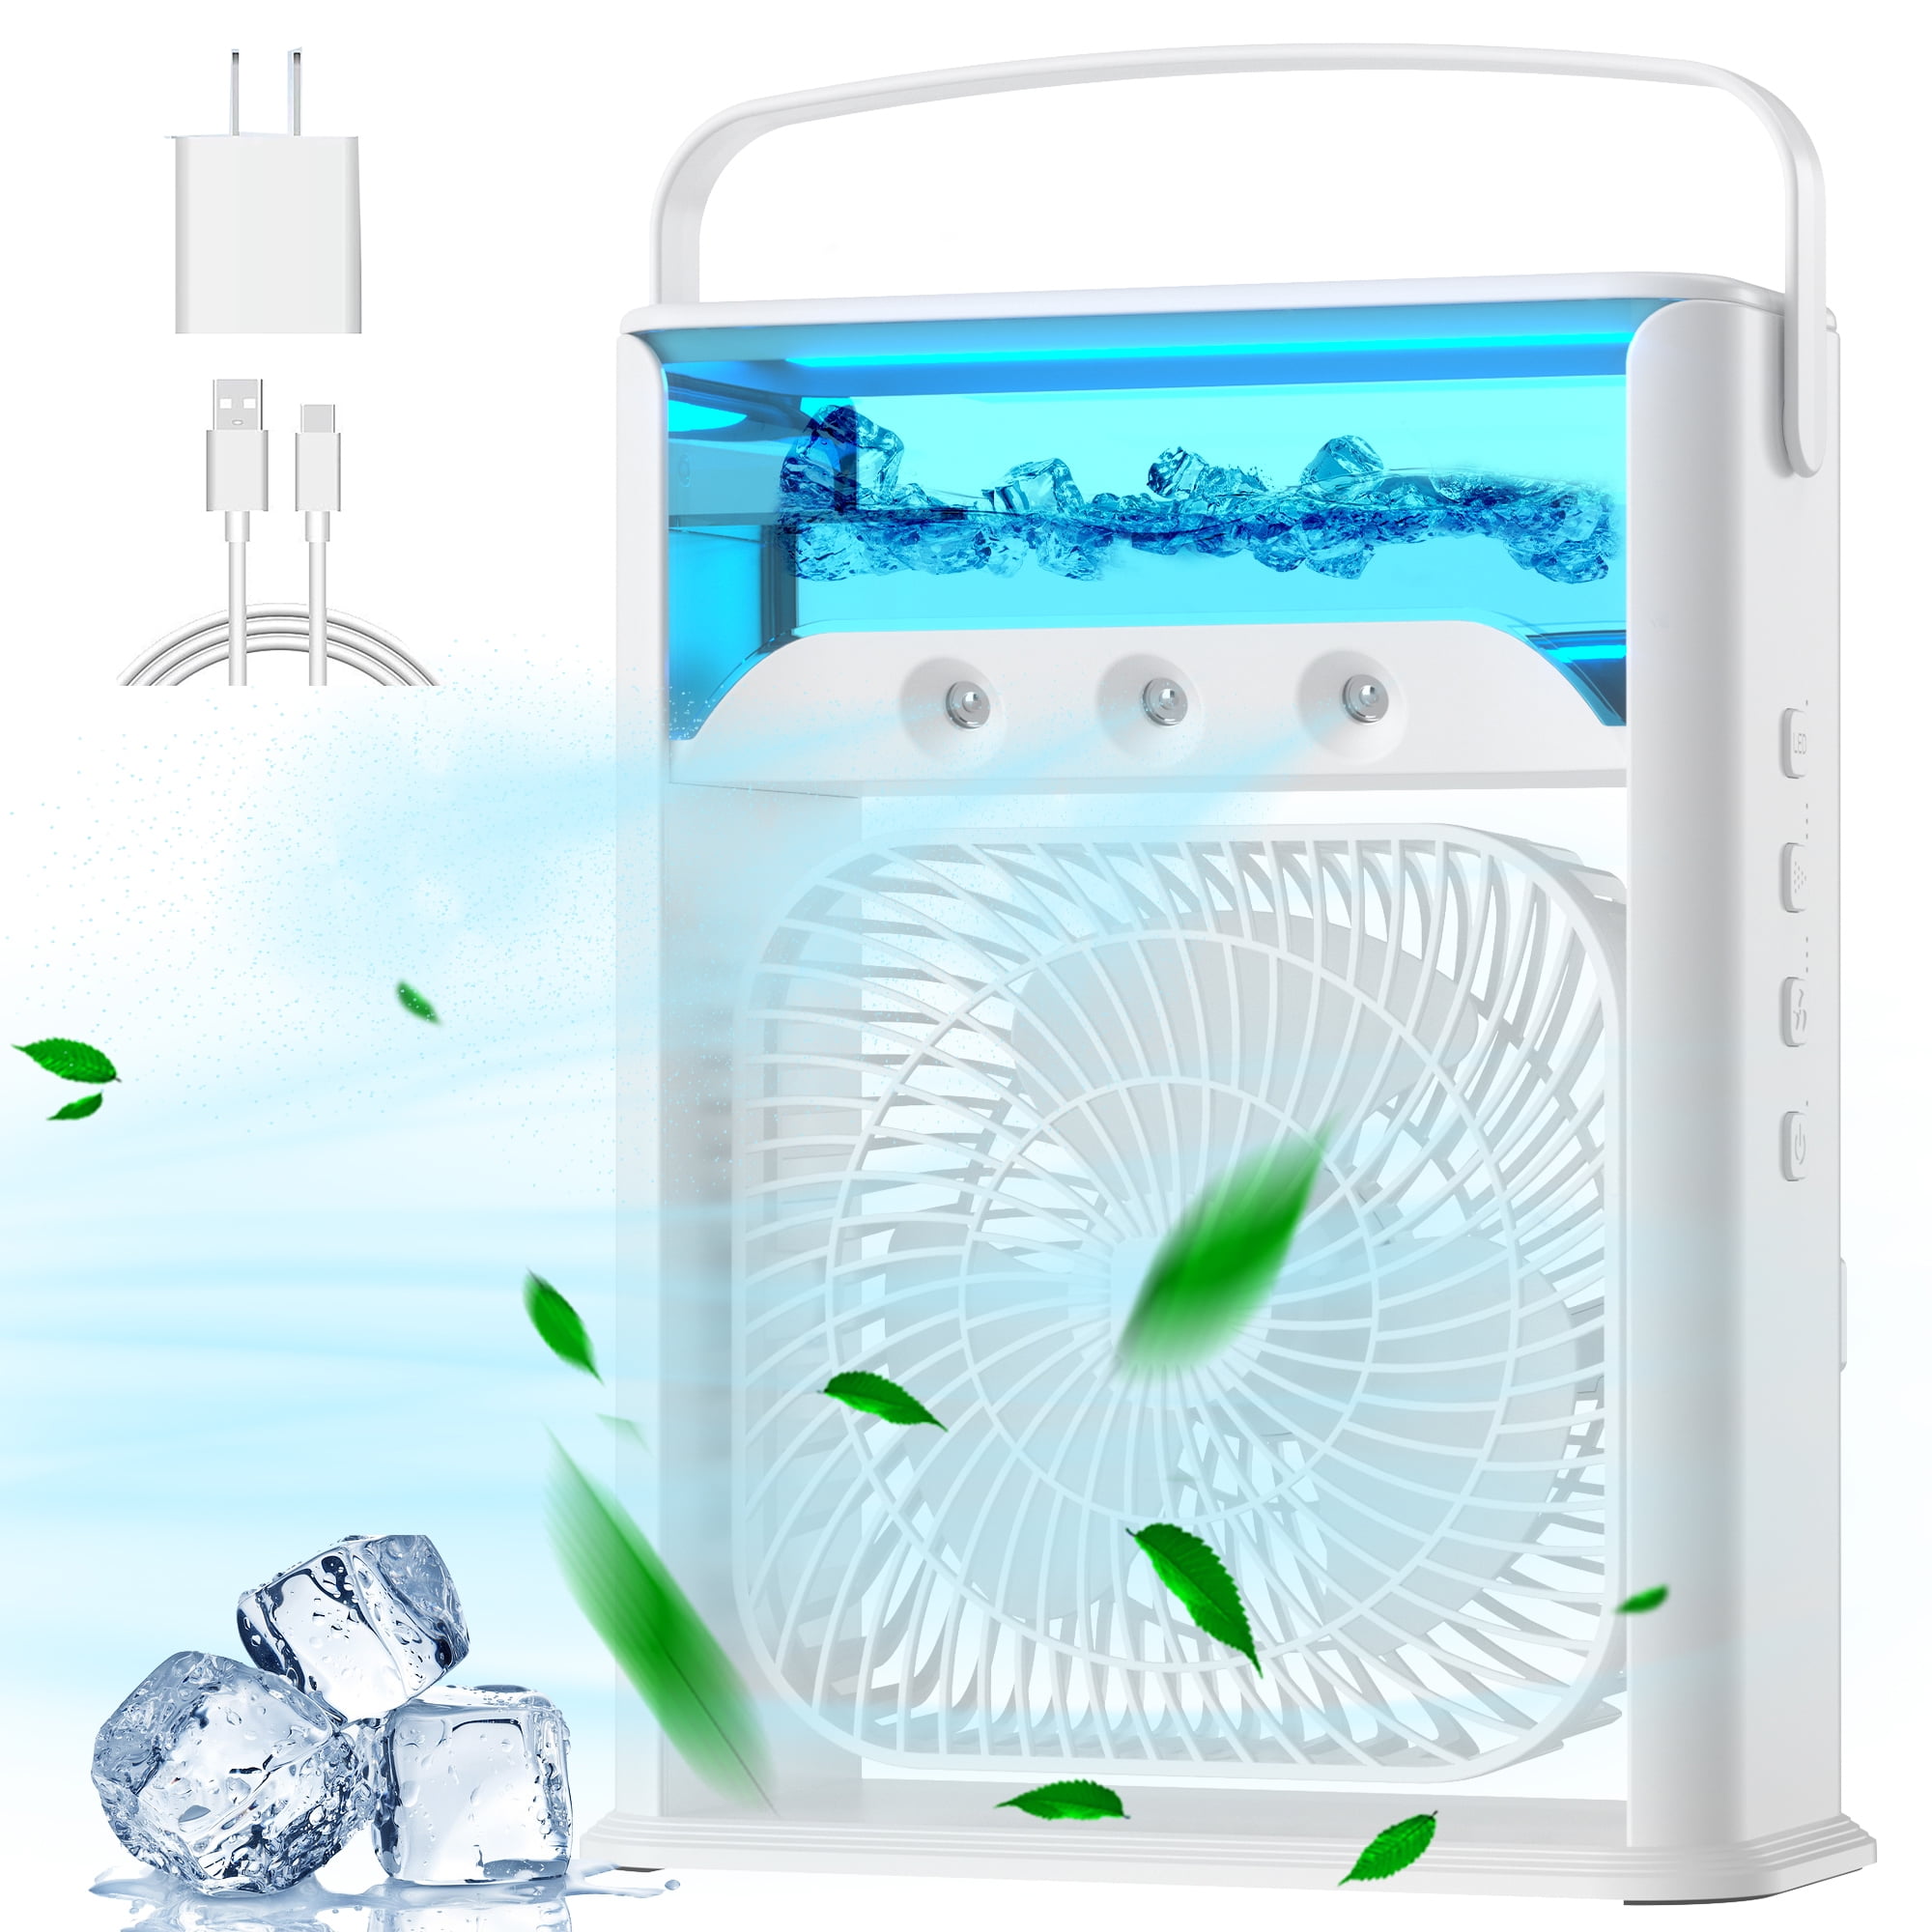 Personal Small Evaporative Air Cooler Humidifier Misting Fan with LED Light 4000mAh Rechargeable Battery for Room Office Travel MIKOSI 3 in 1 Portable Air Conditioner Fan